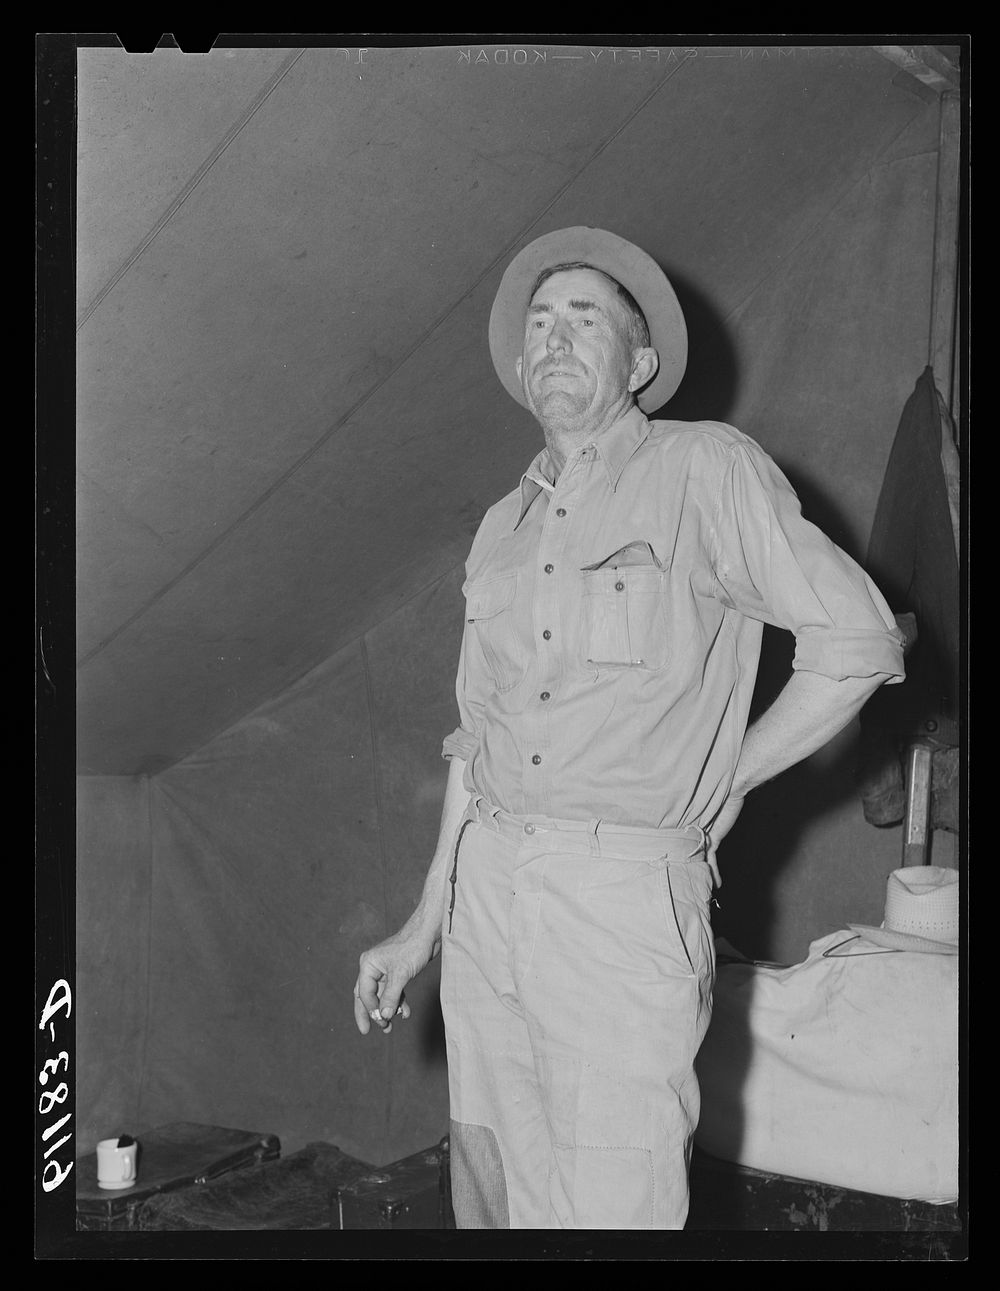 Migratory fruit worker in his tent. Berrien County, Michigan. Sourced from the Library of Congress.